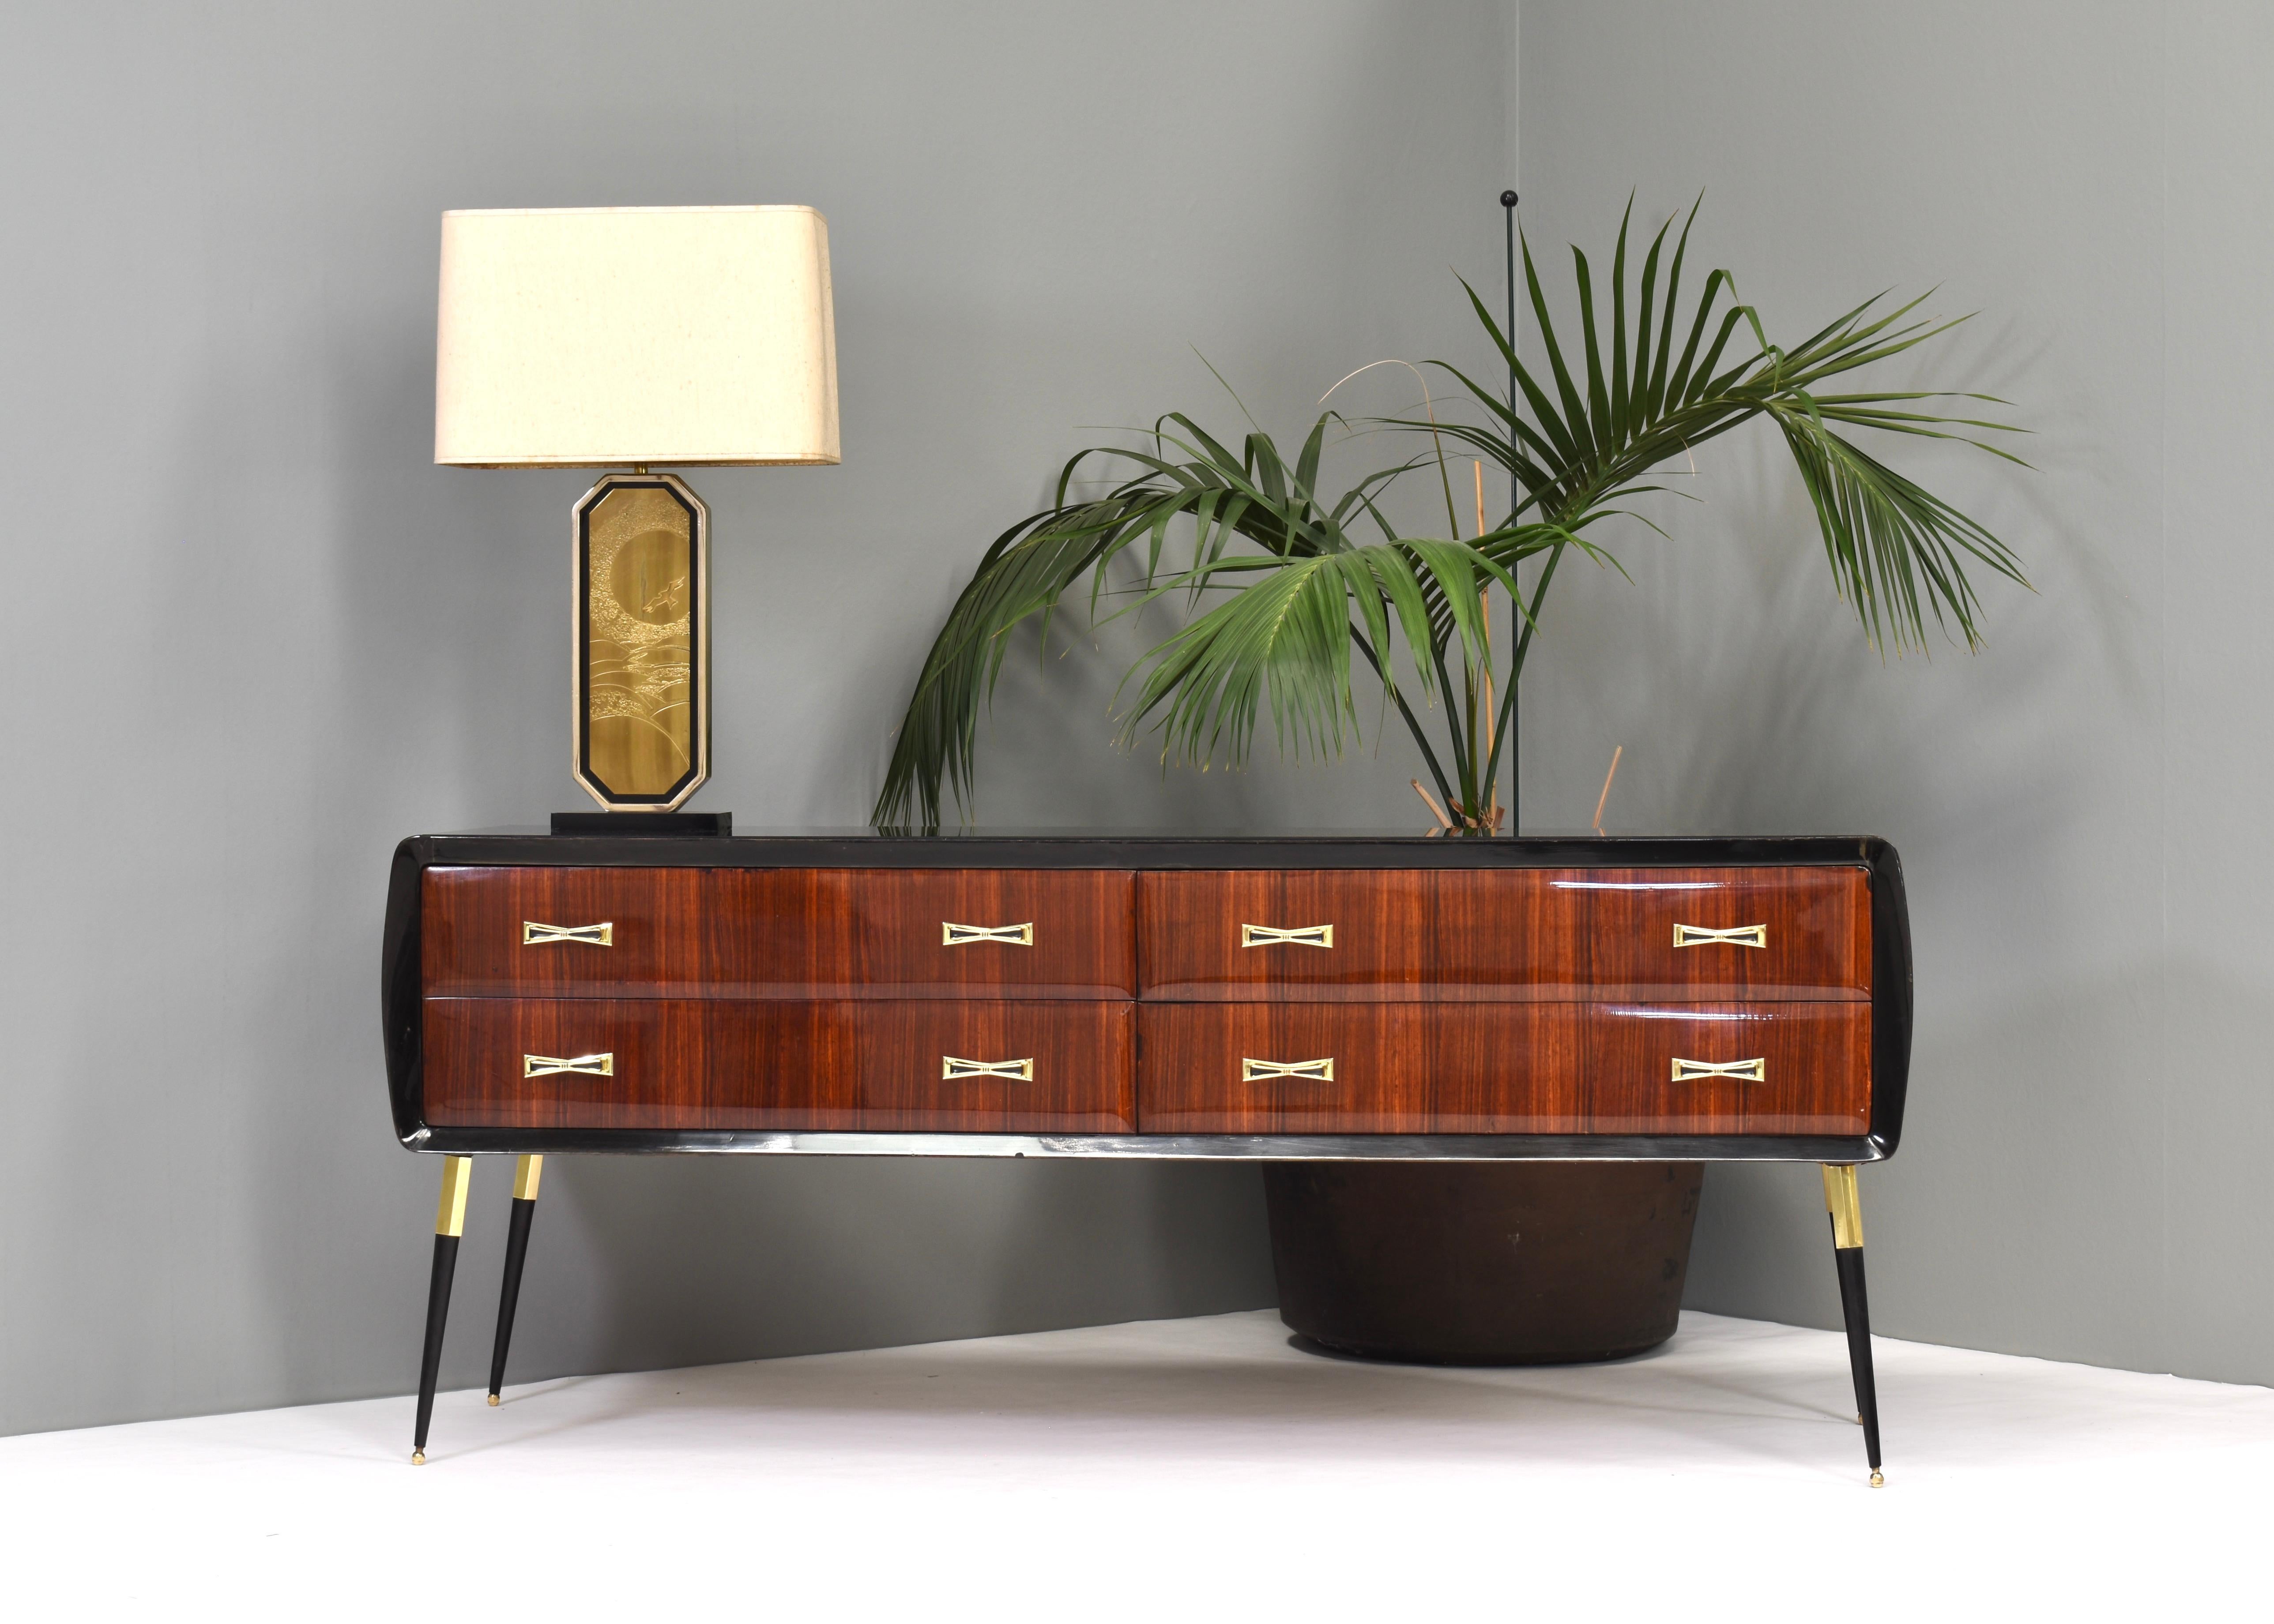 Elegant and sophisticated Italian credenza in Italian walnut, brass and glass, circa 1950.

The credenza features brass grips and legs and a new black glass top. The feet are slightly adjustable in height for leveling.

The credenza has a glossy